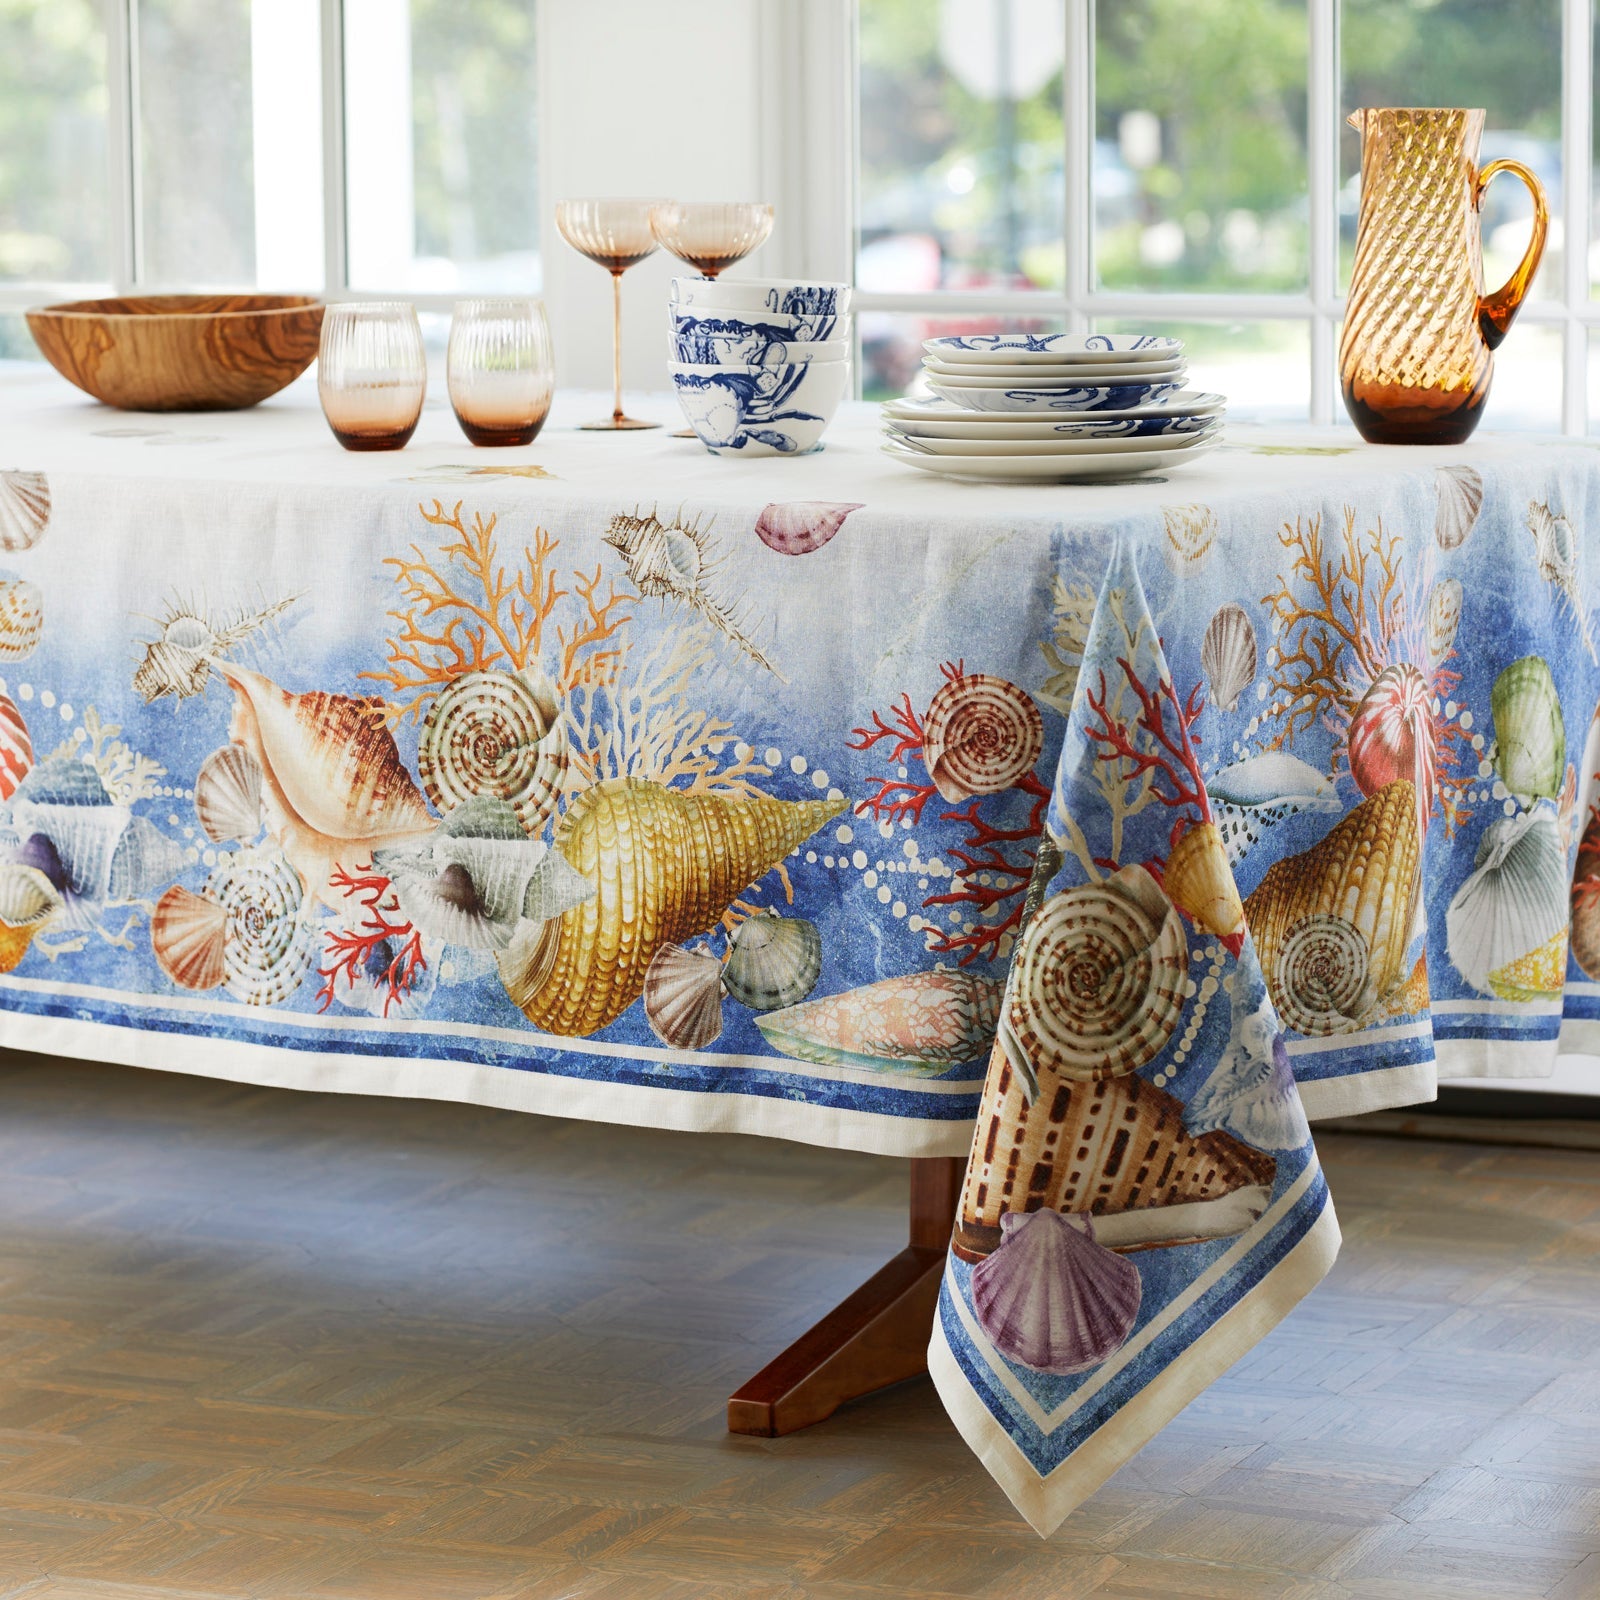 Graphic Print of Sanibel Tablecloth featuring shells and coral in vibrant watercolors on Italian Linen from Caskata